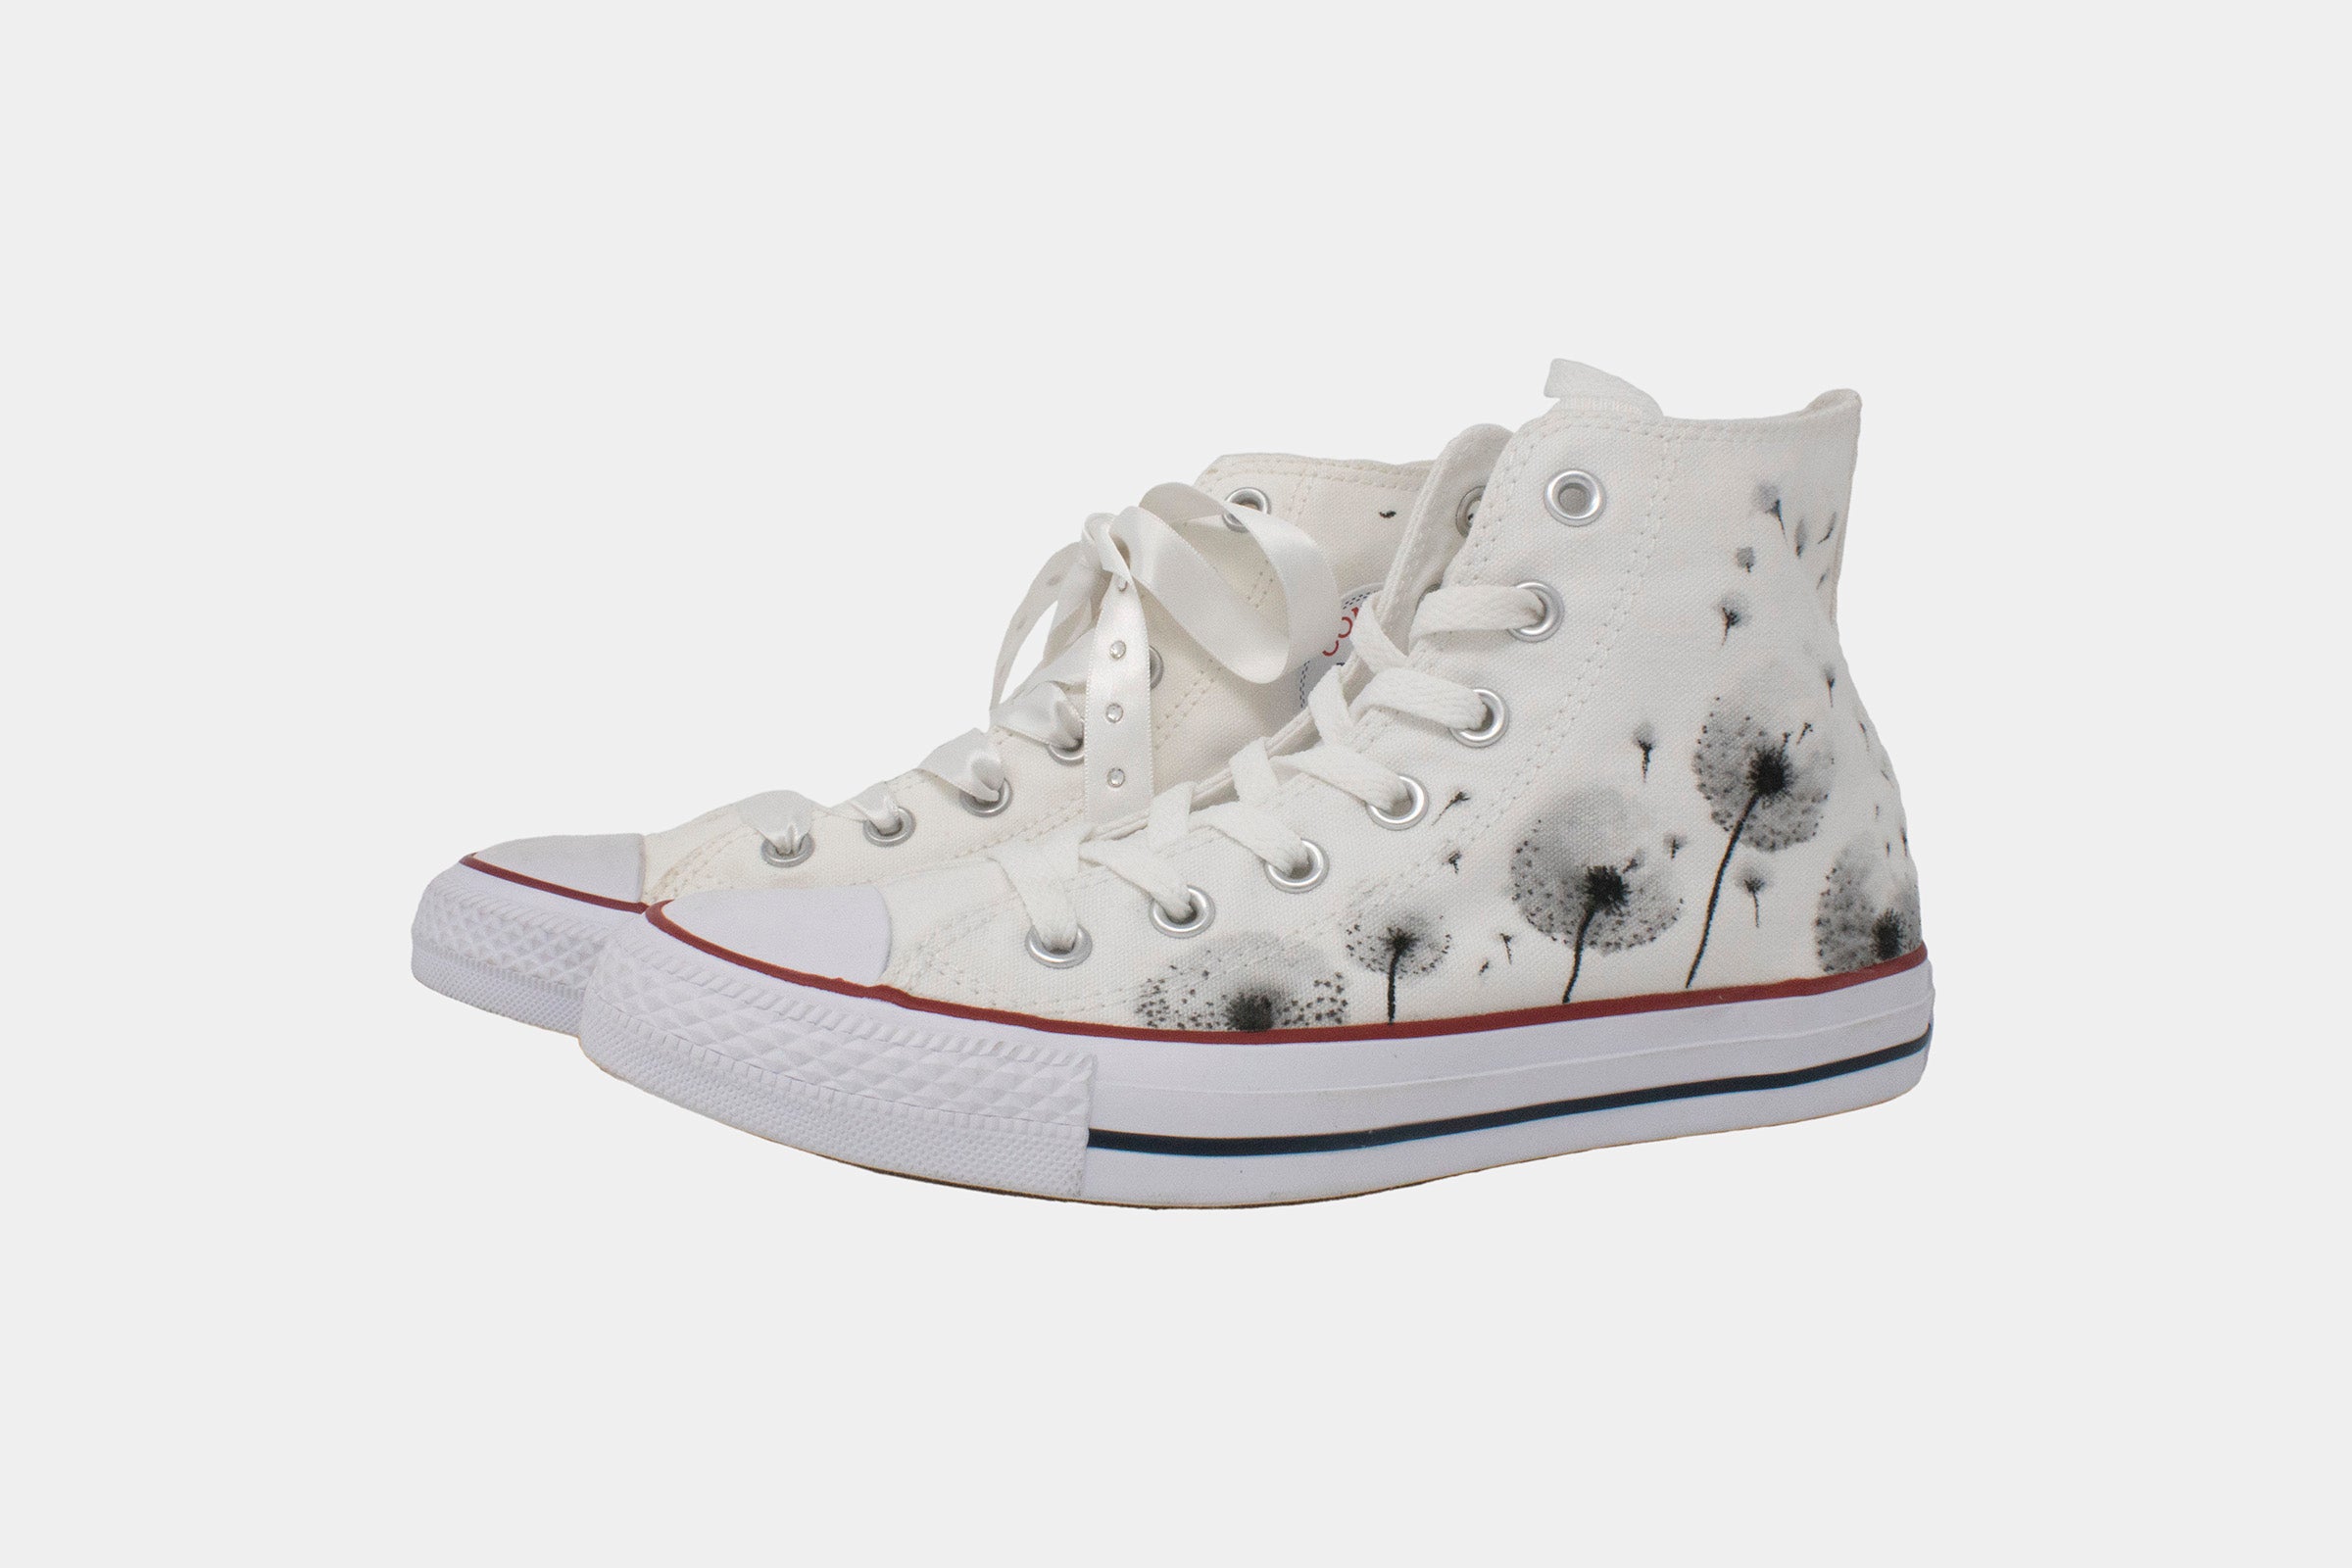 Converse/Chuck Taylor/Wish – Ink my sneakers